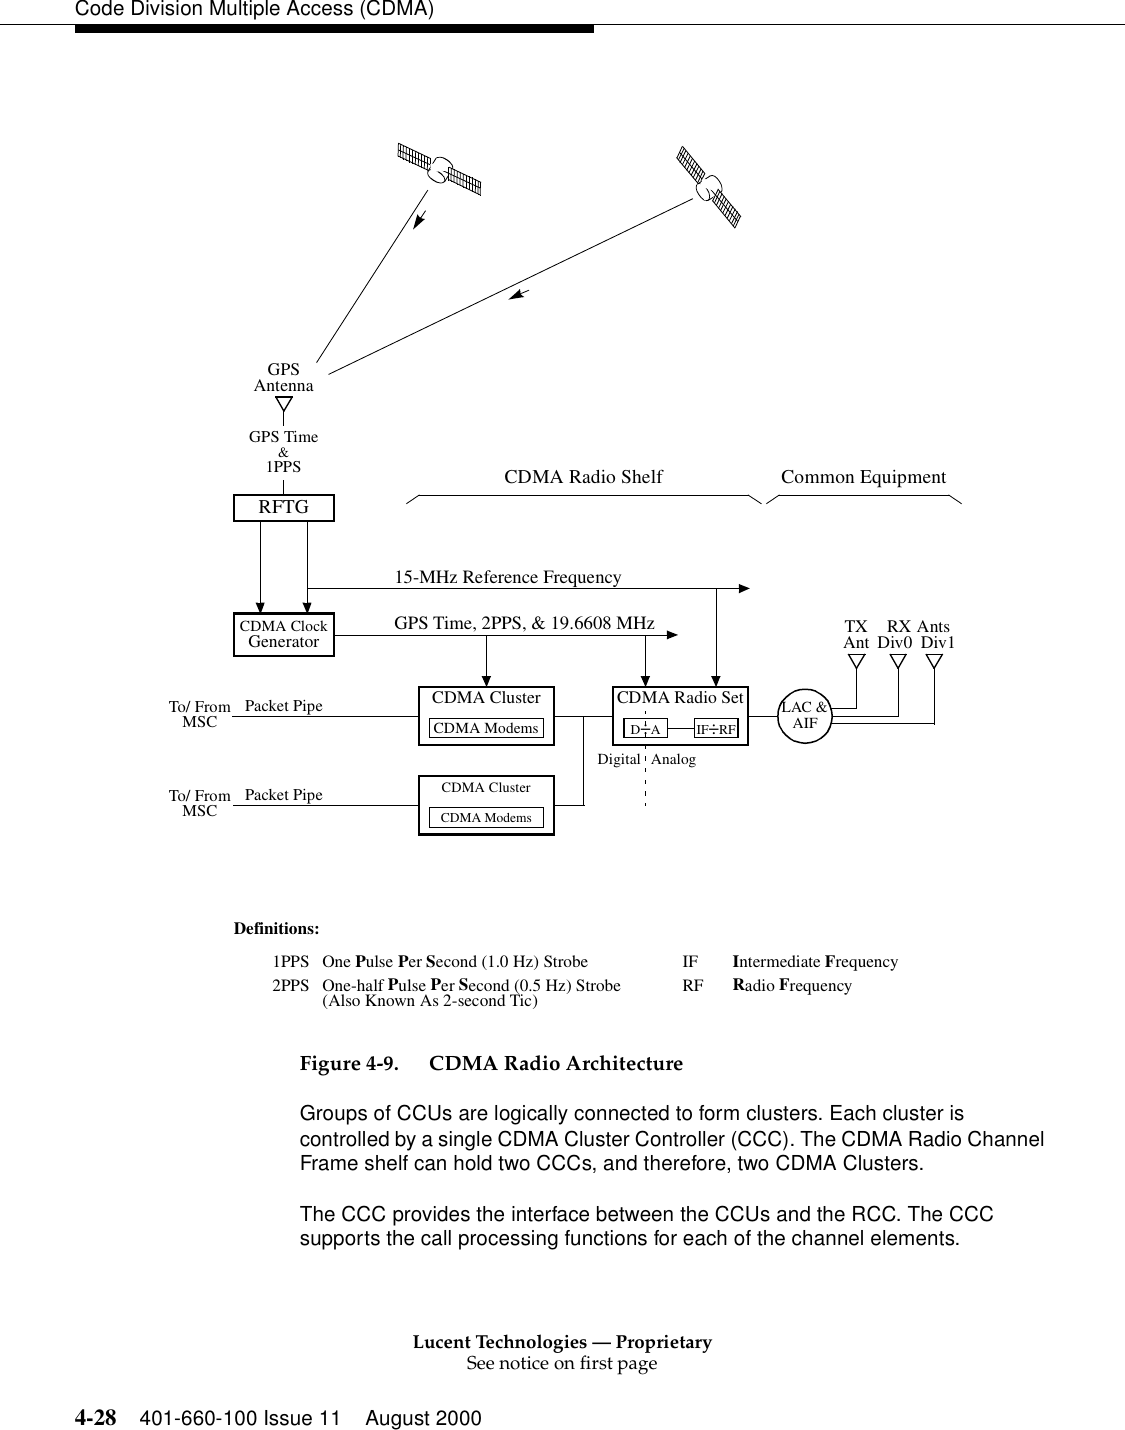 Lucent Technologies — ProprietarySee notice on first page4-28 401-660-100 Issue 11 August 2000Code Division Multiple Access (CDMA)   Figure 4-9. CDMA Radio ArchitectureGroups of CCUs are logically connected to form clusters. Each cluster is controlled by a single CDMA Cluster Controller (CCC). The CDMA Radio Channel Frame shelf can hold two CCCs, and therefore, two CDMA Clusters. The CCC provides the interface between the CCUs and the RCC. The CCC supports the call processing functions for each of the channel elements.Packet PipeTo/ FromMSCCDMA Radio Shelf Common EquipmentCDMA ClusterTXAnt RX AntsDiv0  Div1LAC &amp;AIFCDMA ModemsRFTGGPSAntennaCDMA Radio SetCDMA ClusterCDMA ModemsIF÷RFD÷A15-MHz Reference FrequencyGPS Time, 2PPS, &amp; 19.6608 MHzCDMA ClockGeneratorTo/ FromMSCPacket PipeDigital Analog2PPS1PPSDefinitions:One-half Pulse Per Second (0.5 Hz) StrobeOne Pulse Per Second (1.0 Hz) Strobe IFRFIntermediate FrequencyRadio Frequency(Also Known As 2-second Tic)GPS Time&amp;1PPS